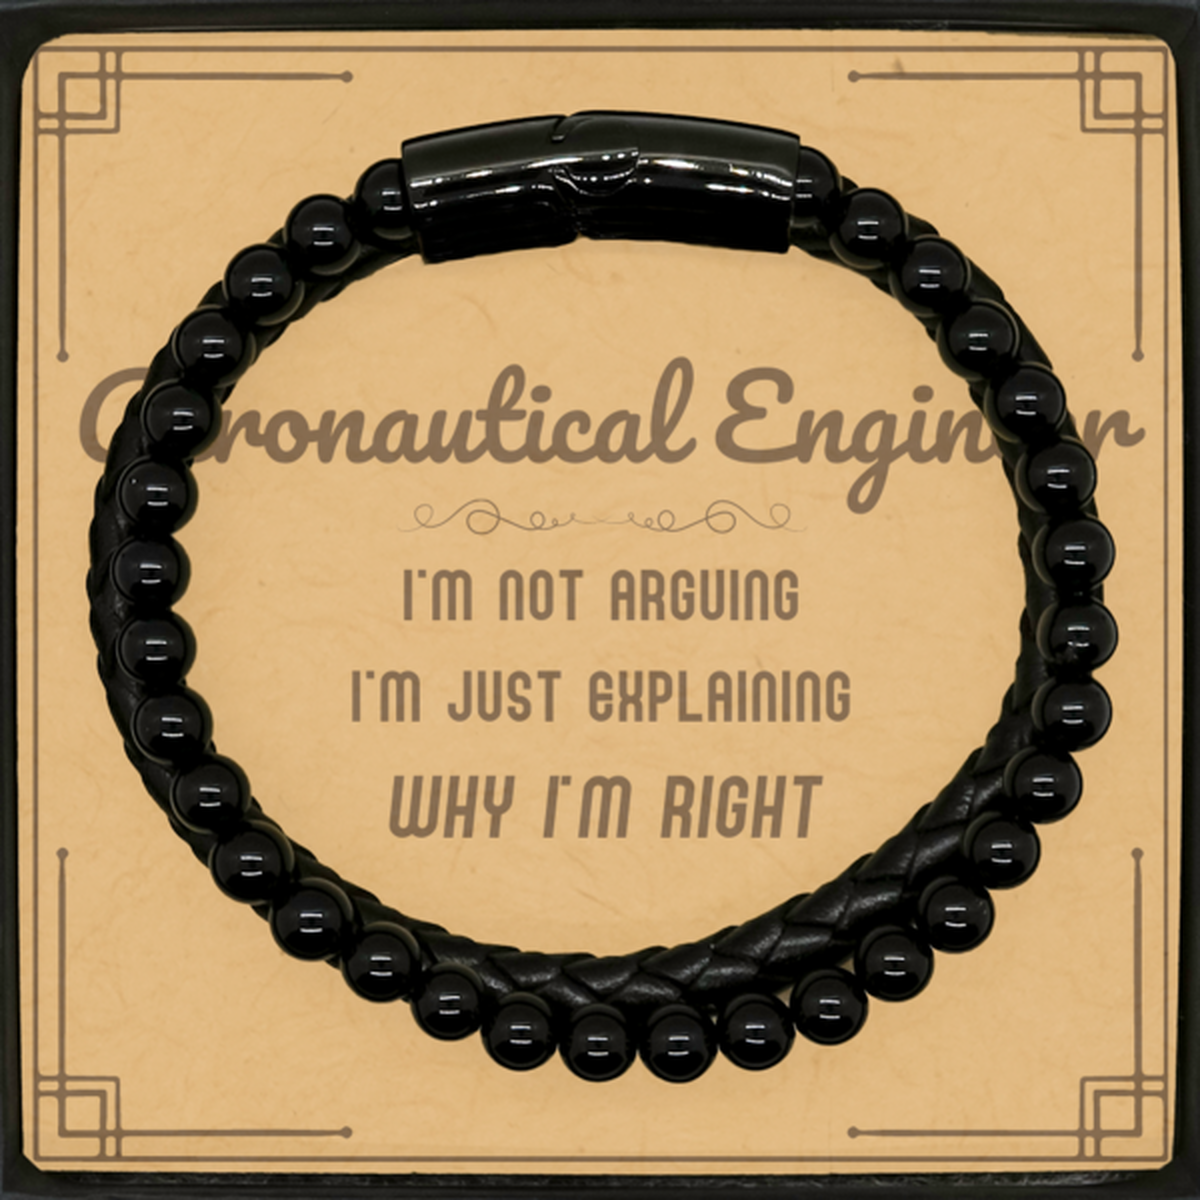 Aeronautical Engineer I'm not Arguing. I'm Just Explaining Why I'm RIGHT Stone Leather Bracelets, Funny Saying Quote Aeronautical Engineer Gifts For Aeronautical Engineer Message Card Graduation Birthday Christmas Gifts for Men Women Coworker